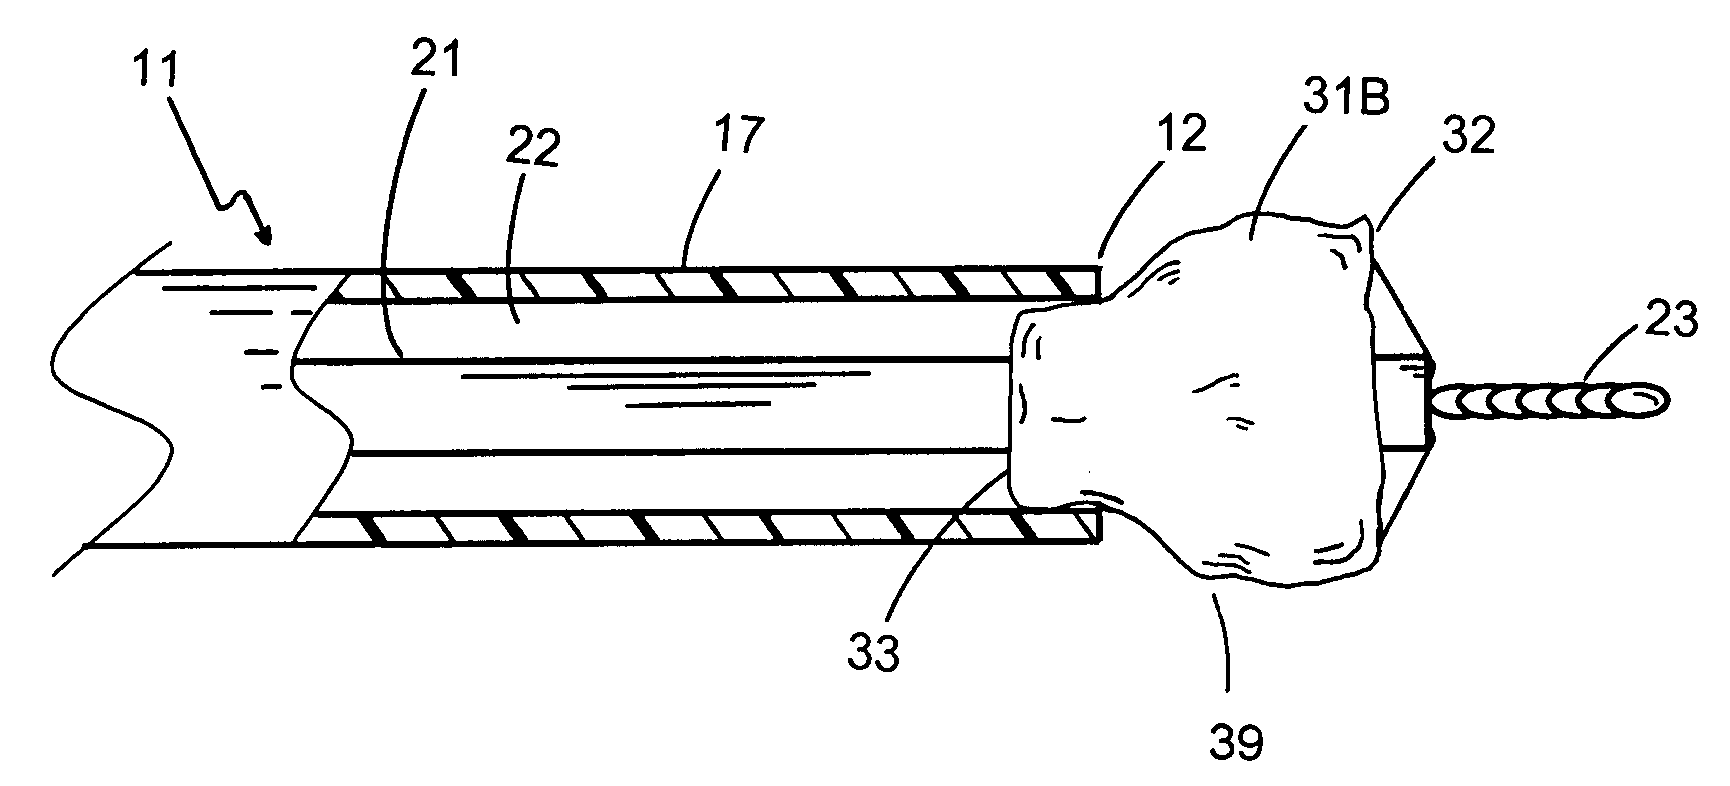 Delivery system for a stentless valve bioprosthesis